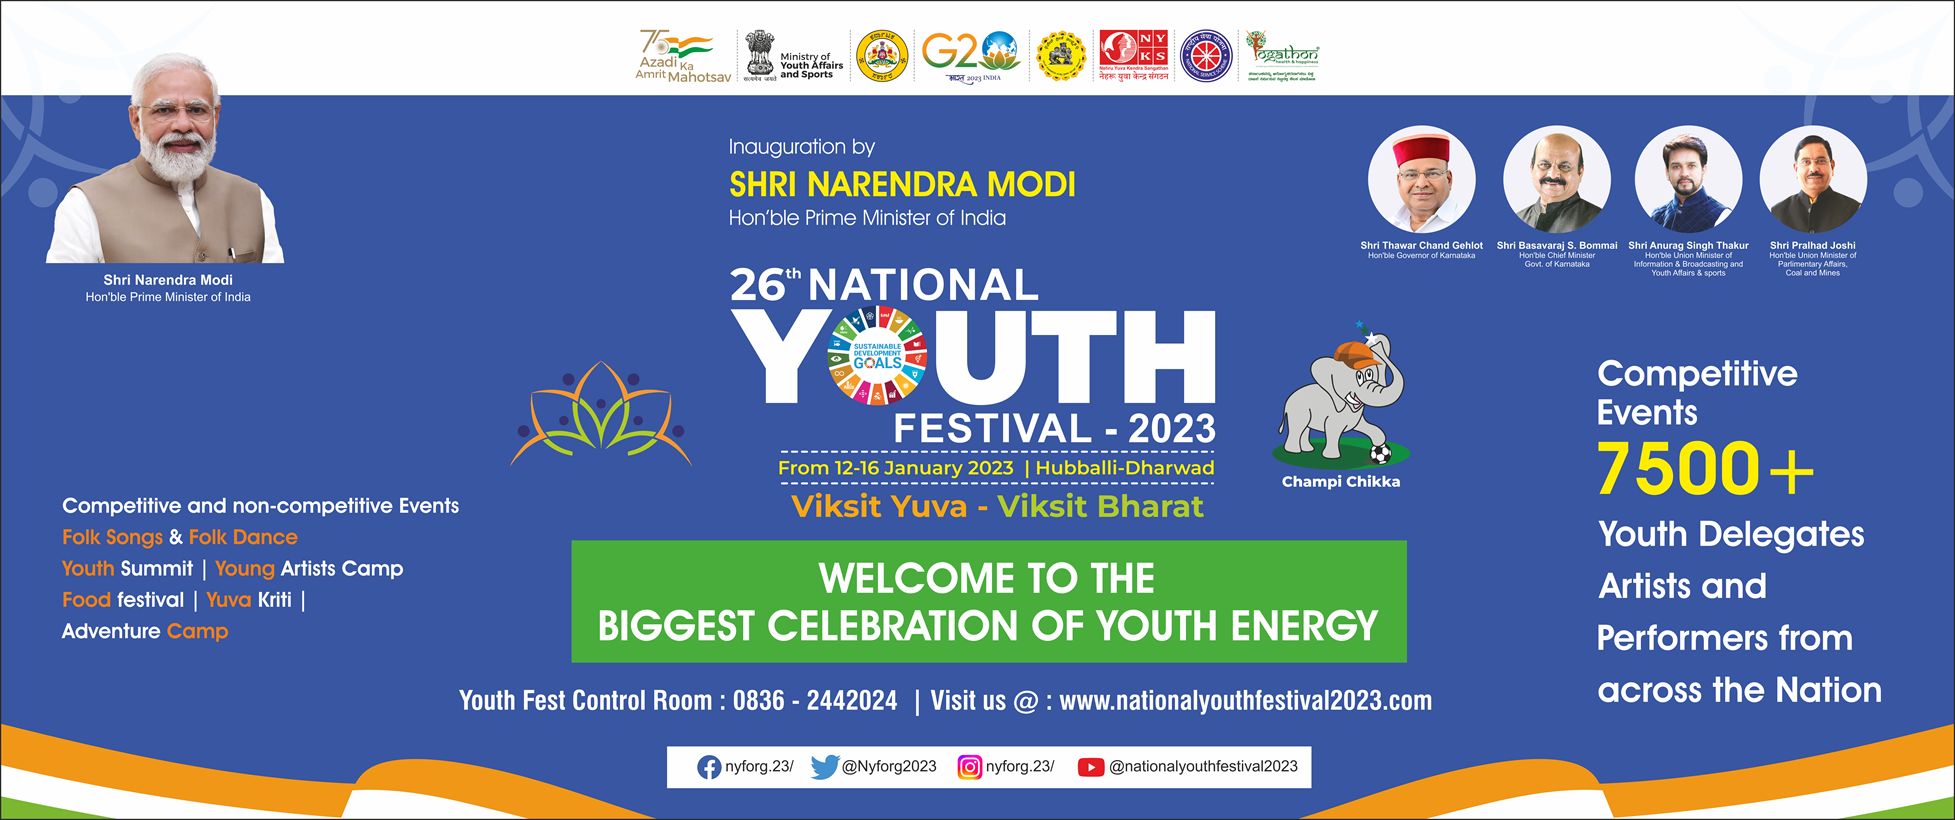 NATIONAL YOUTH FESTIVAL 2023 HOME